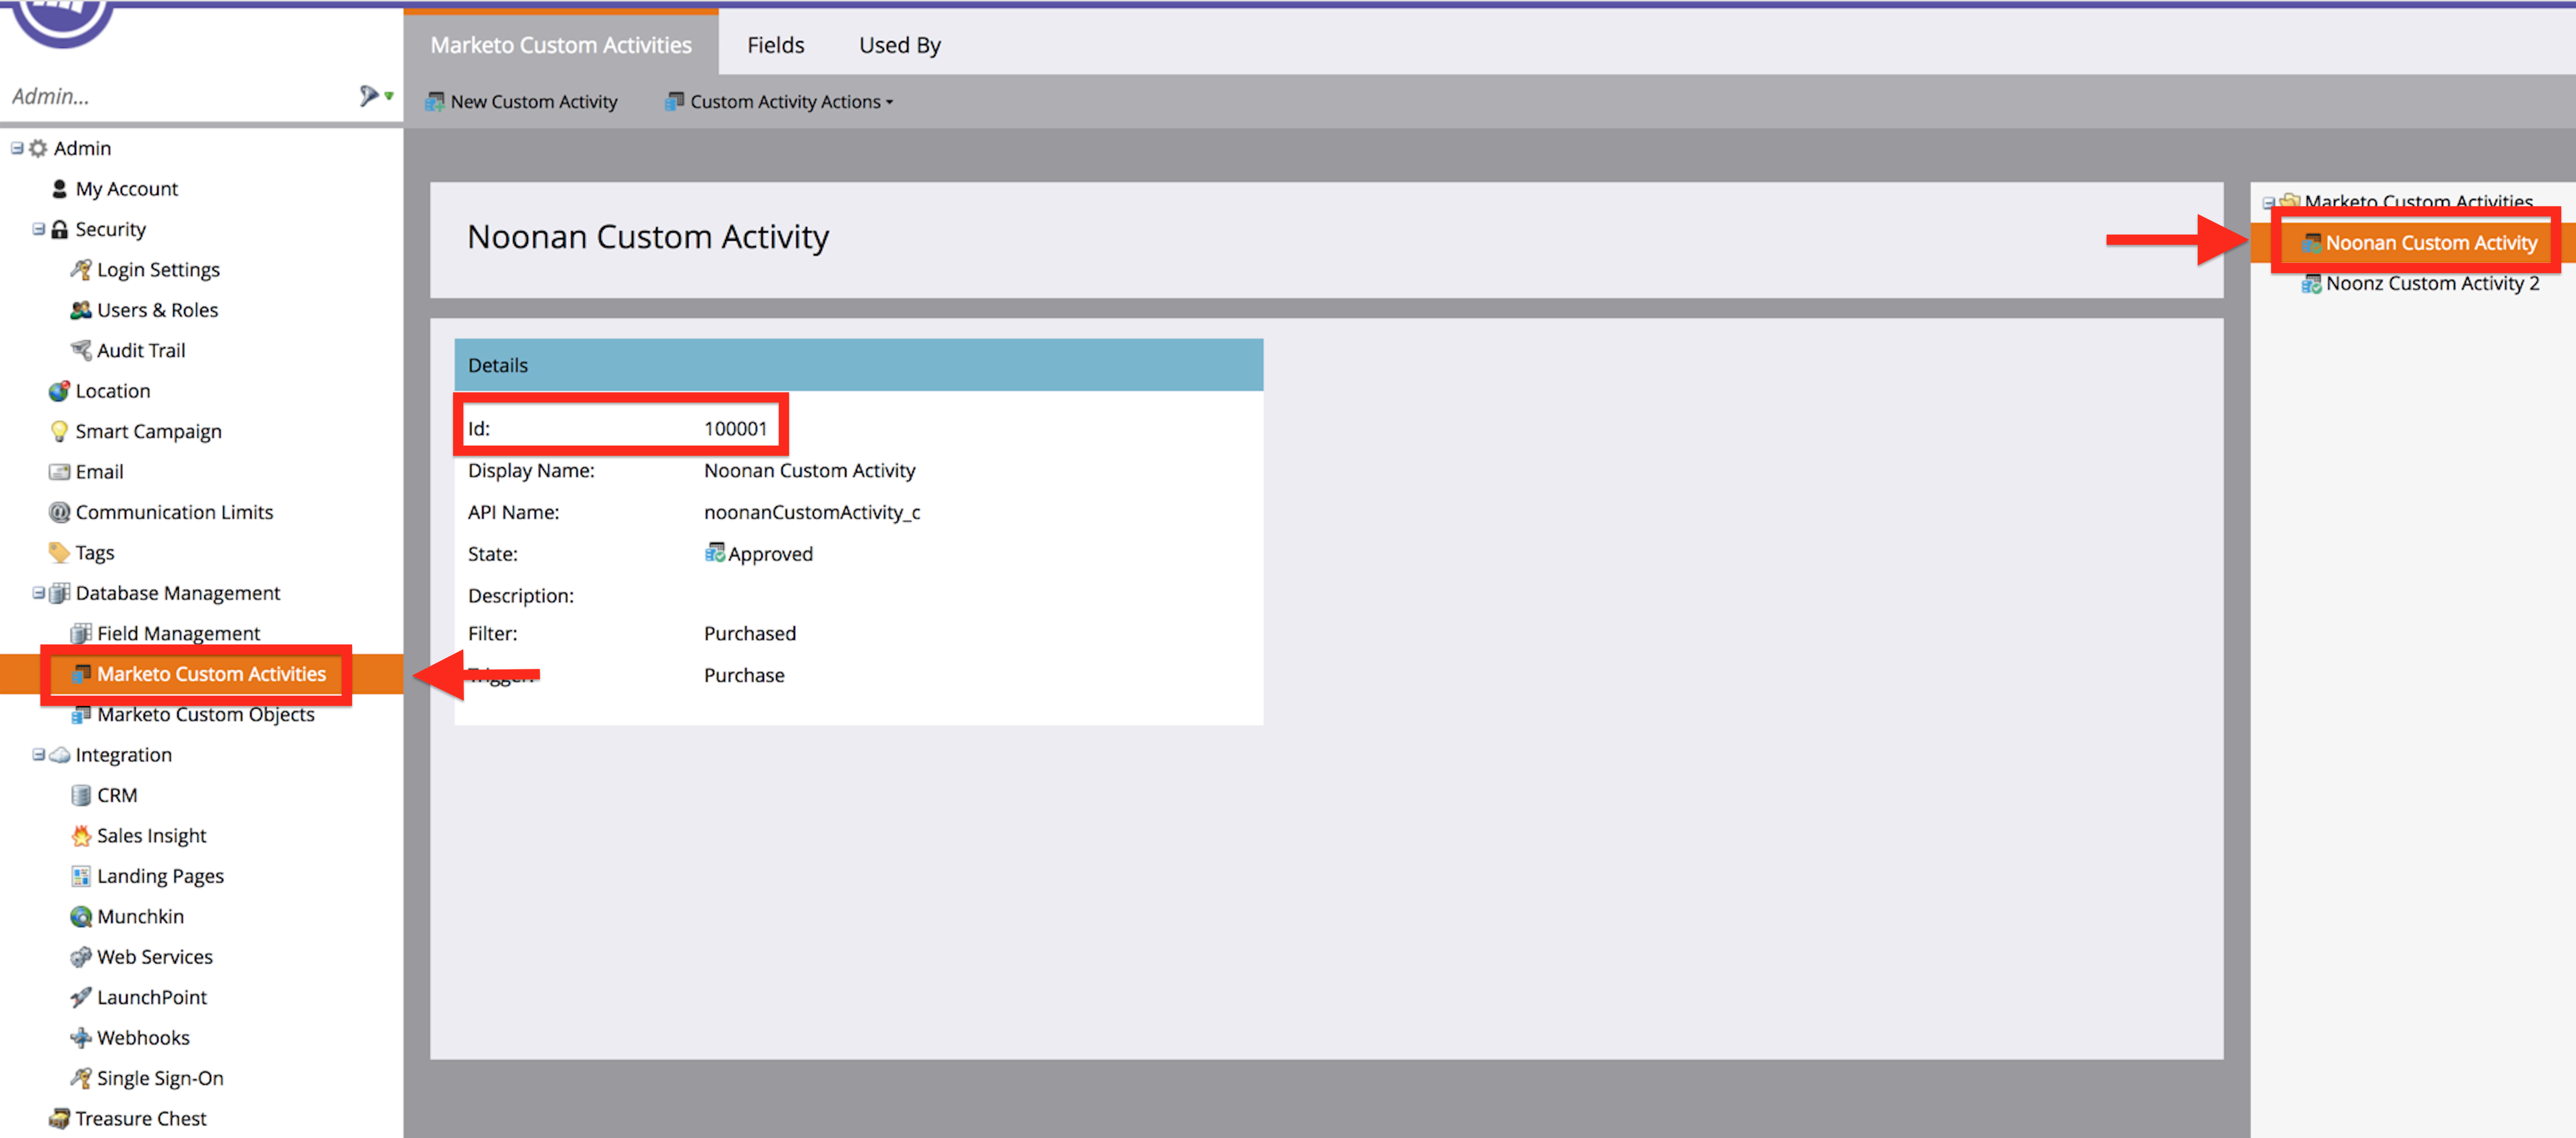 A screenshot of the Marketo Custom Activities page.